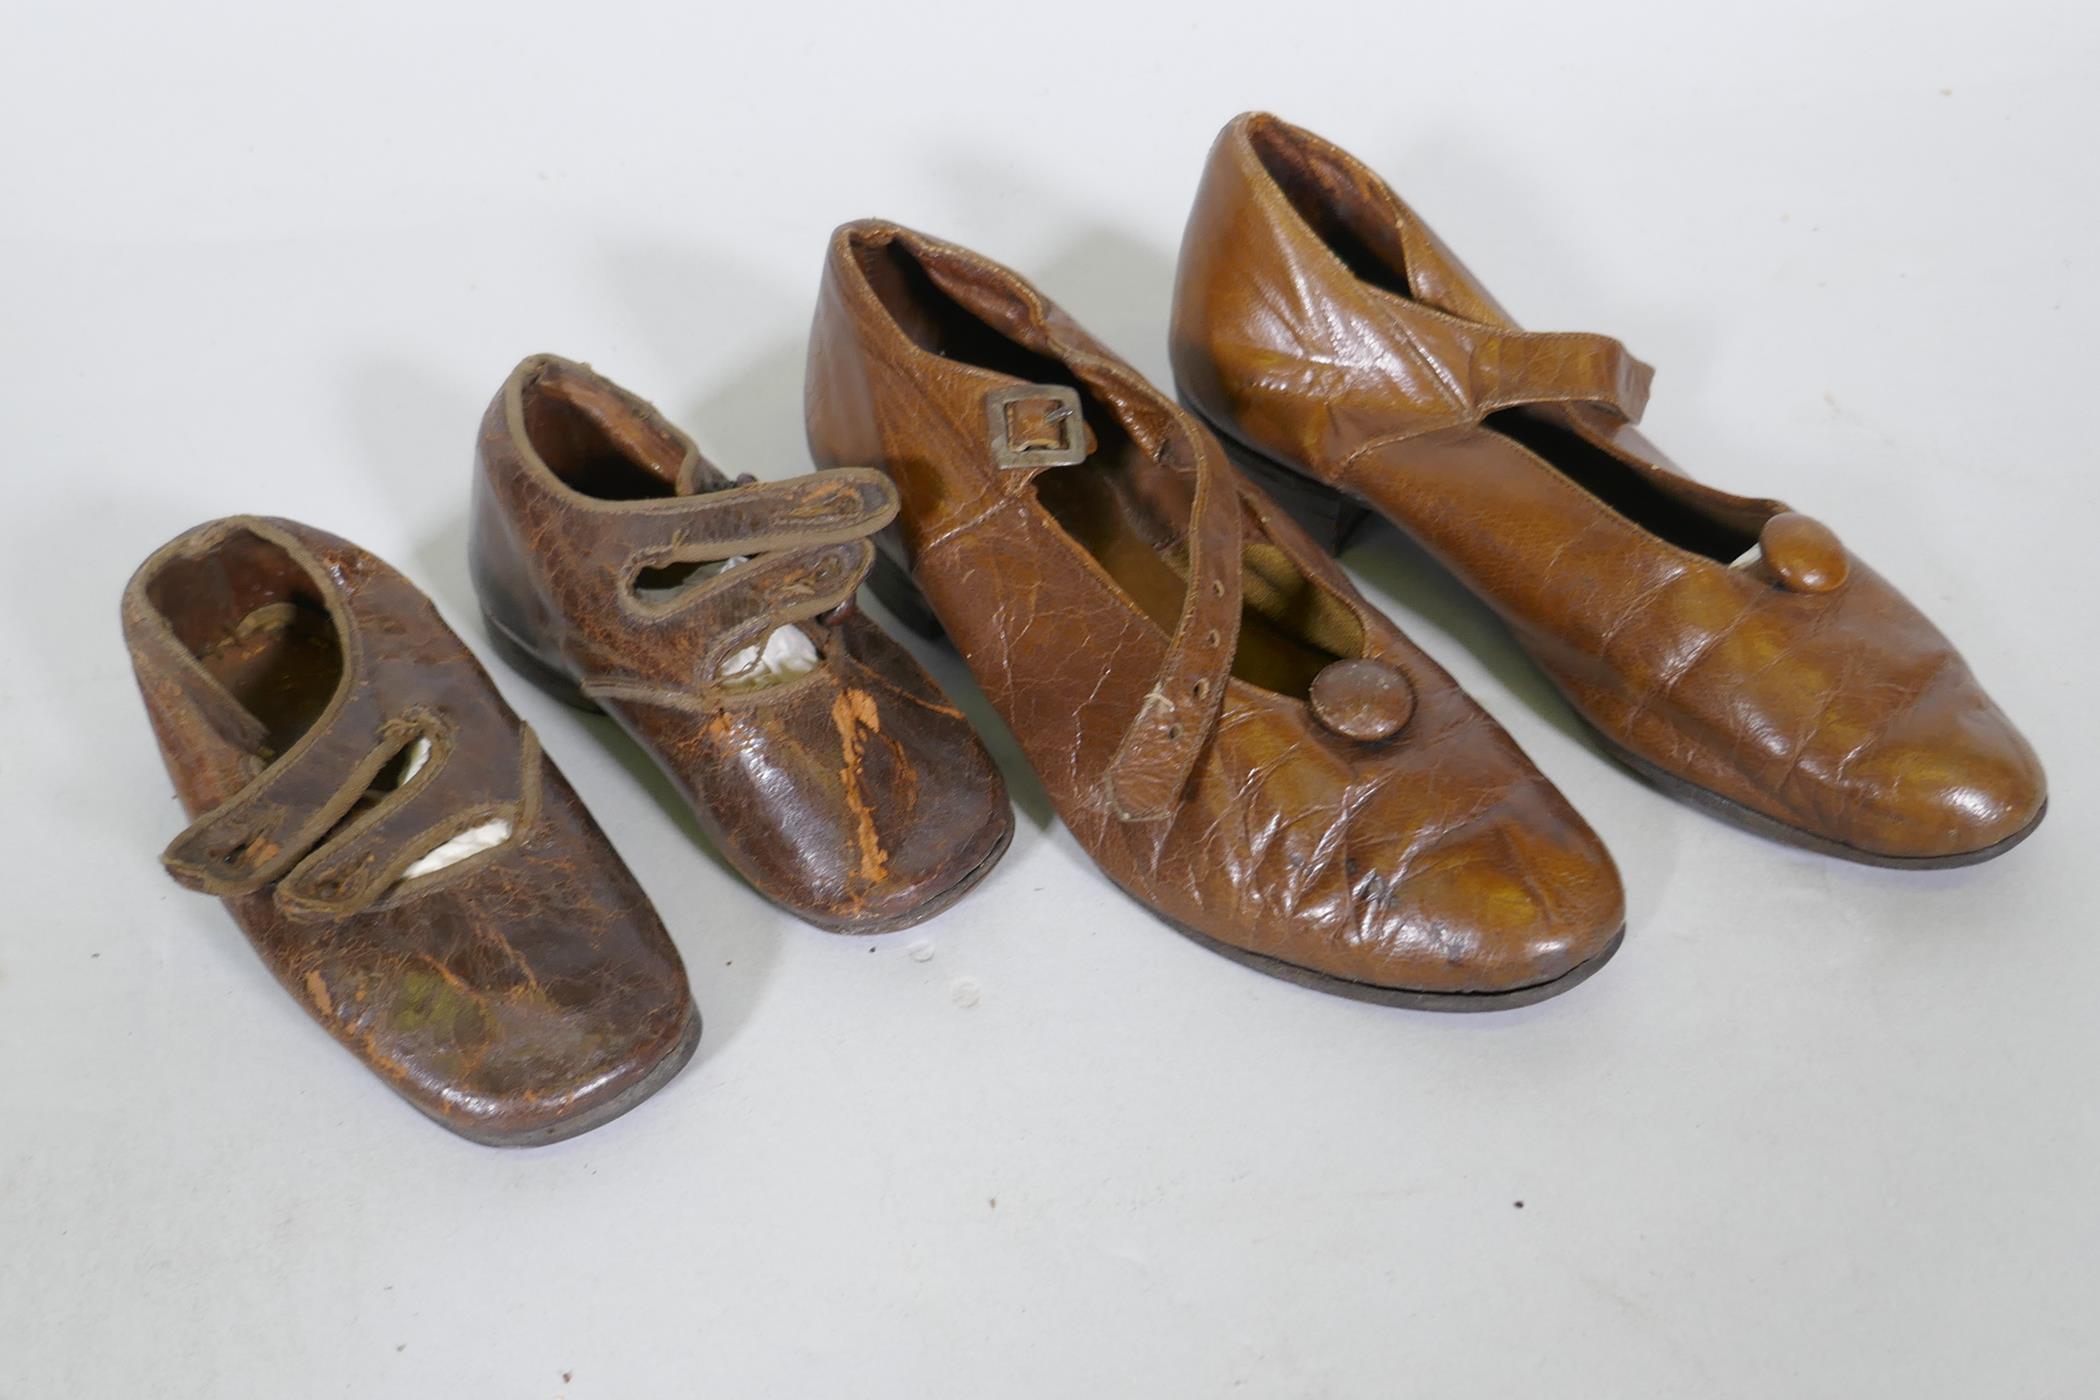 A pair of late C19th/early C20th child's leather shoes, 12cm long, and another pair larger